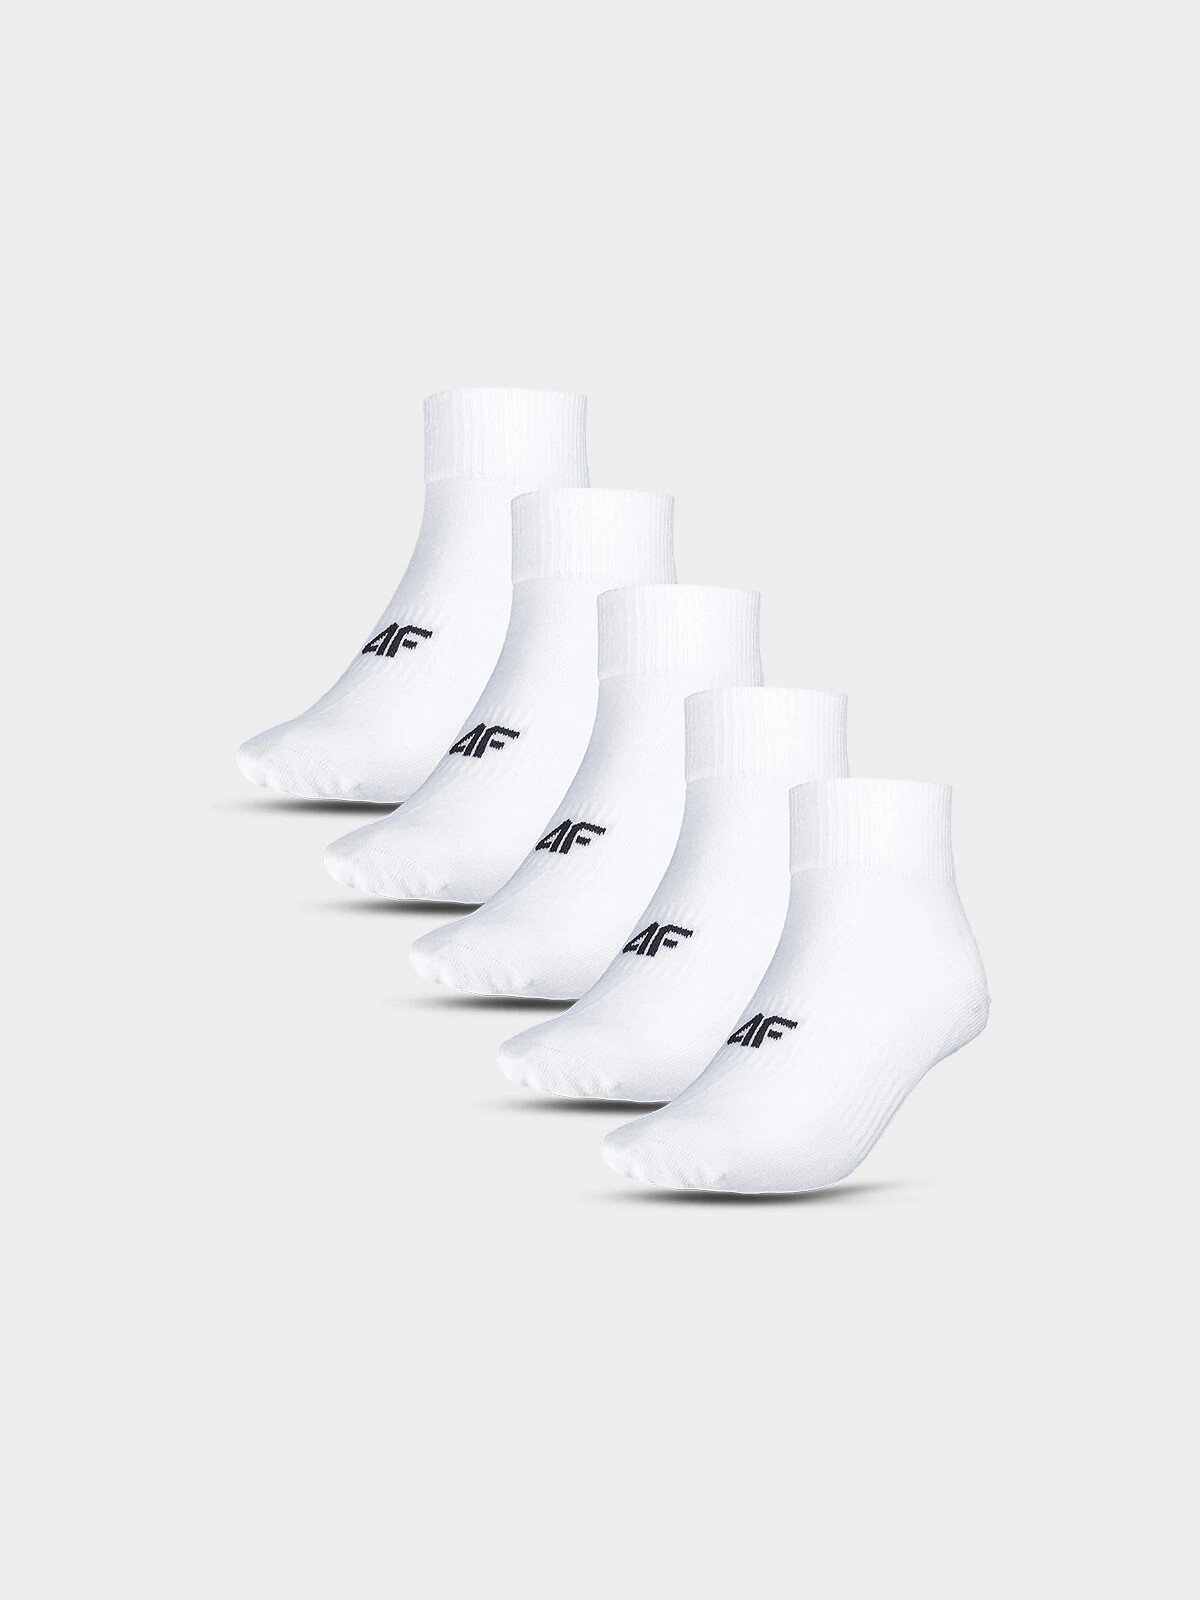 Men's Casual Socks Above the Ankle (5pack) 4F - White